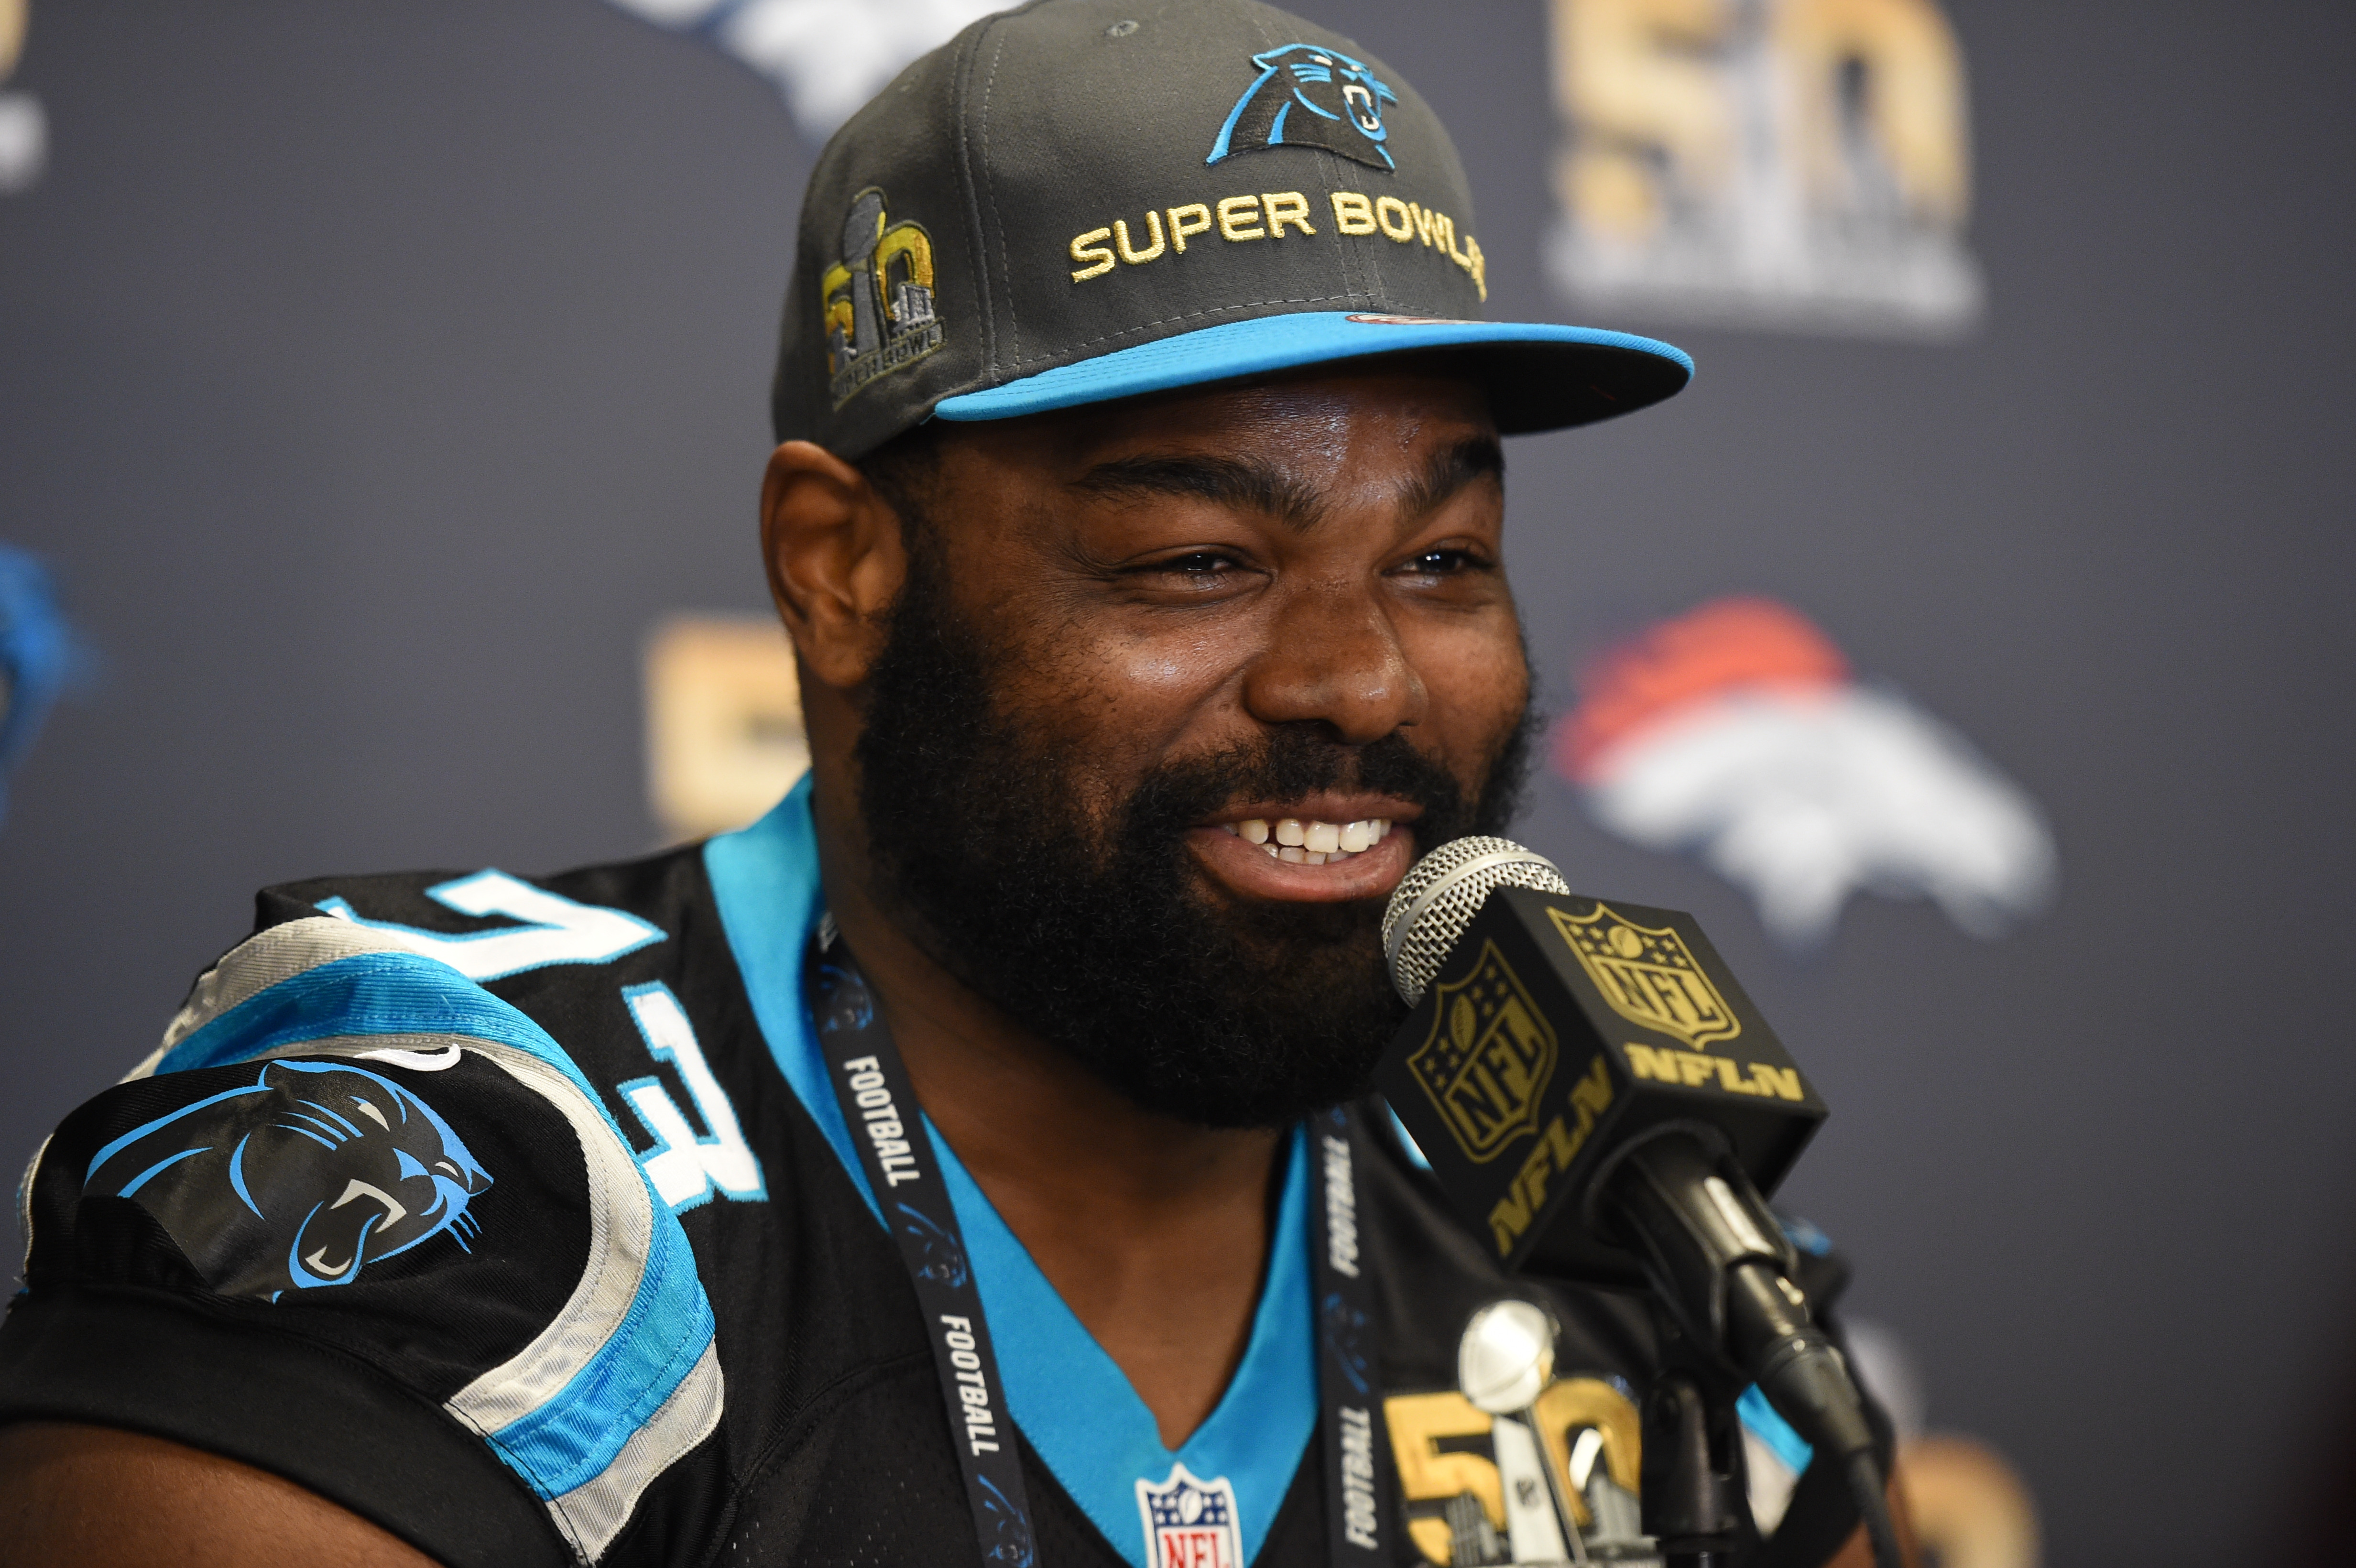 Michael Oher talks during the Carolina Panthers press conference for Super Bowl 50 in 2016 in San Jose, California. | Source: Getty Images